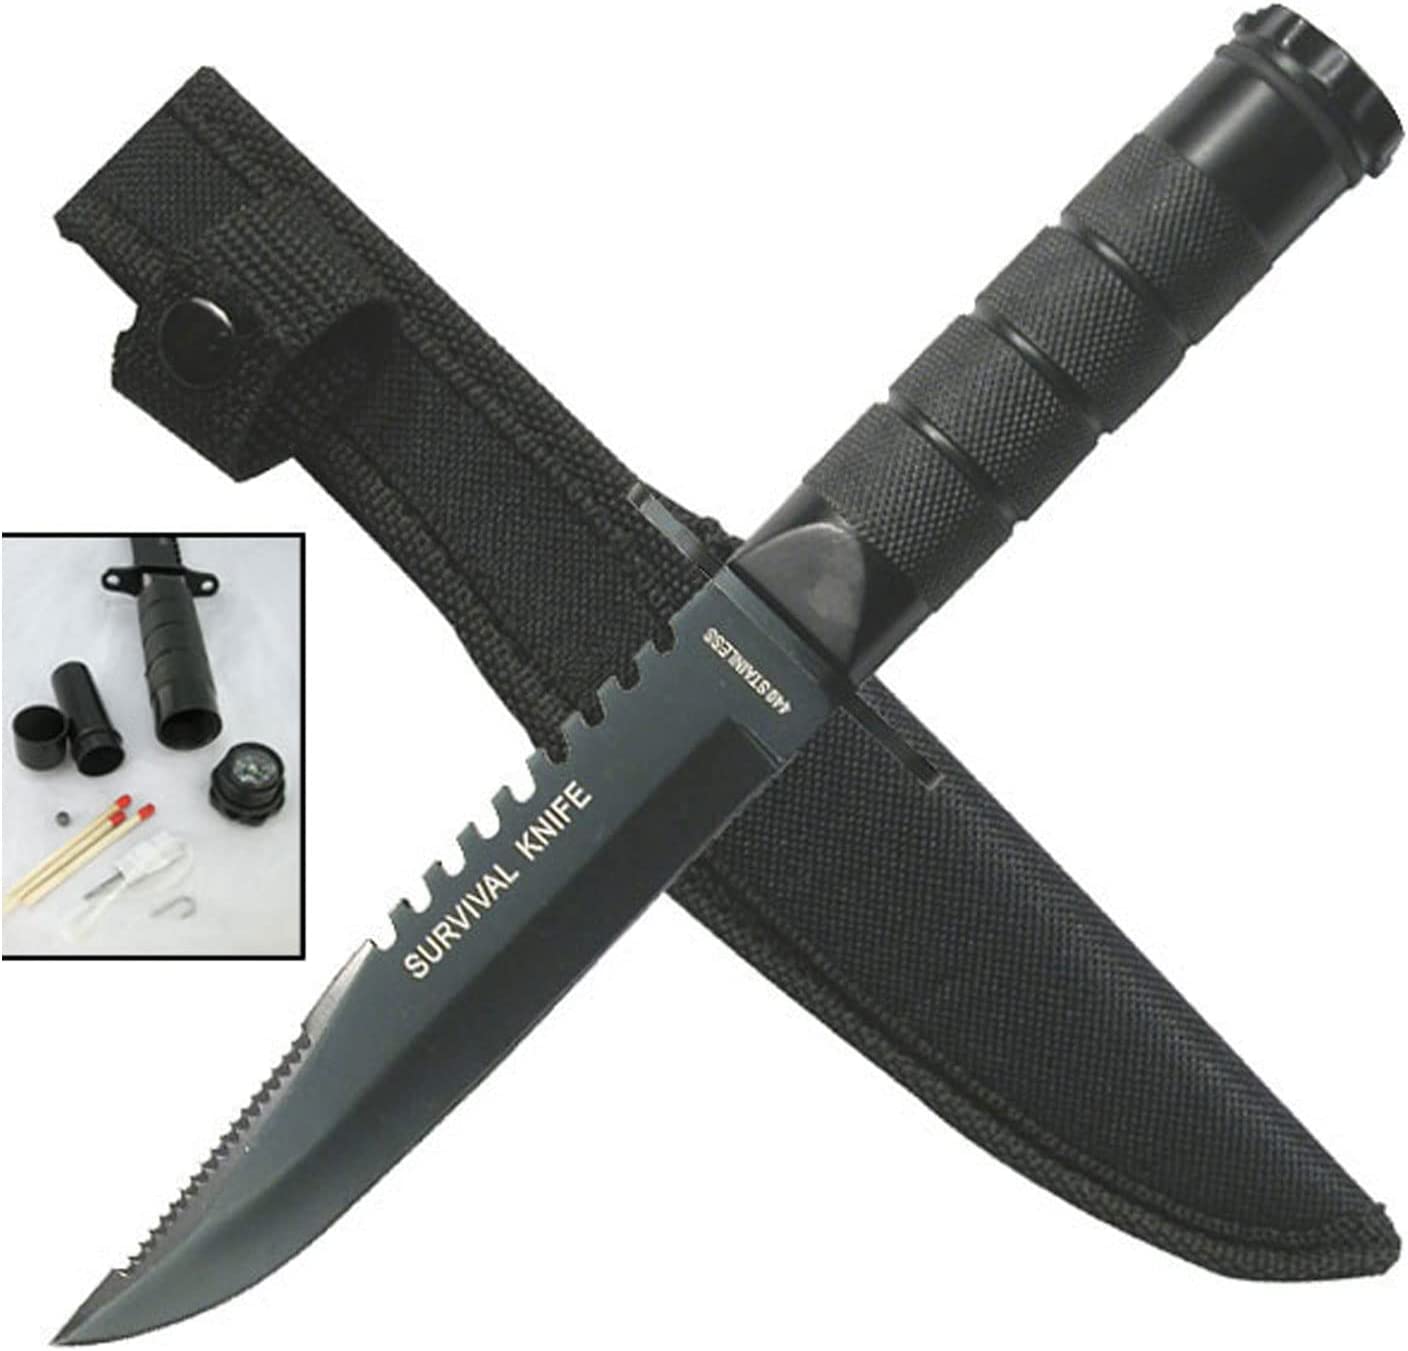 Survivor HK-690 Fixed Blade Survival Knife, Double Reverse Serrated Blade, Metal Handle, 8-1/2-Inch Overall